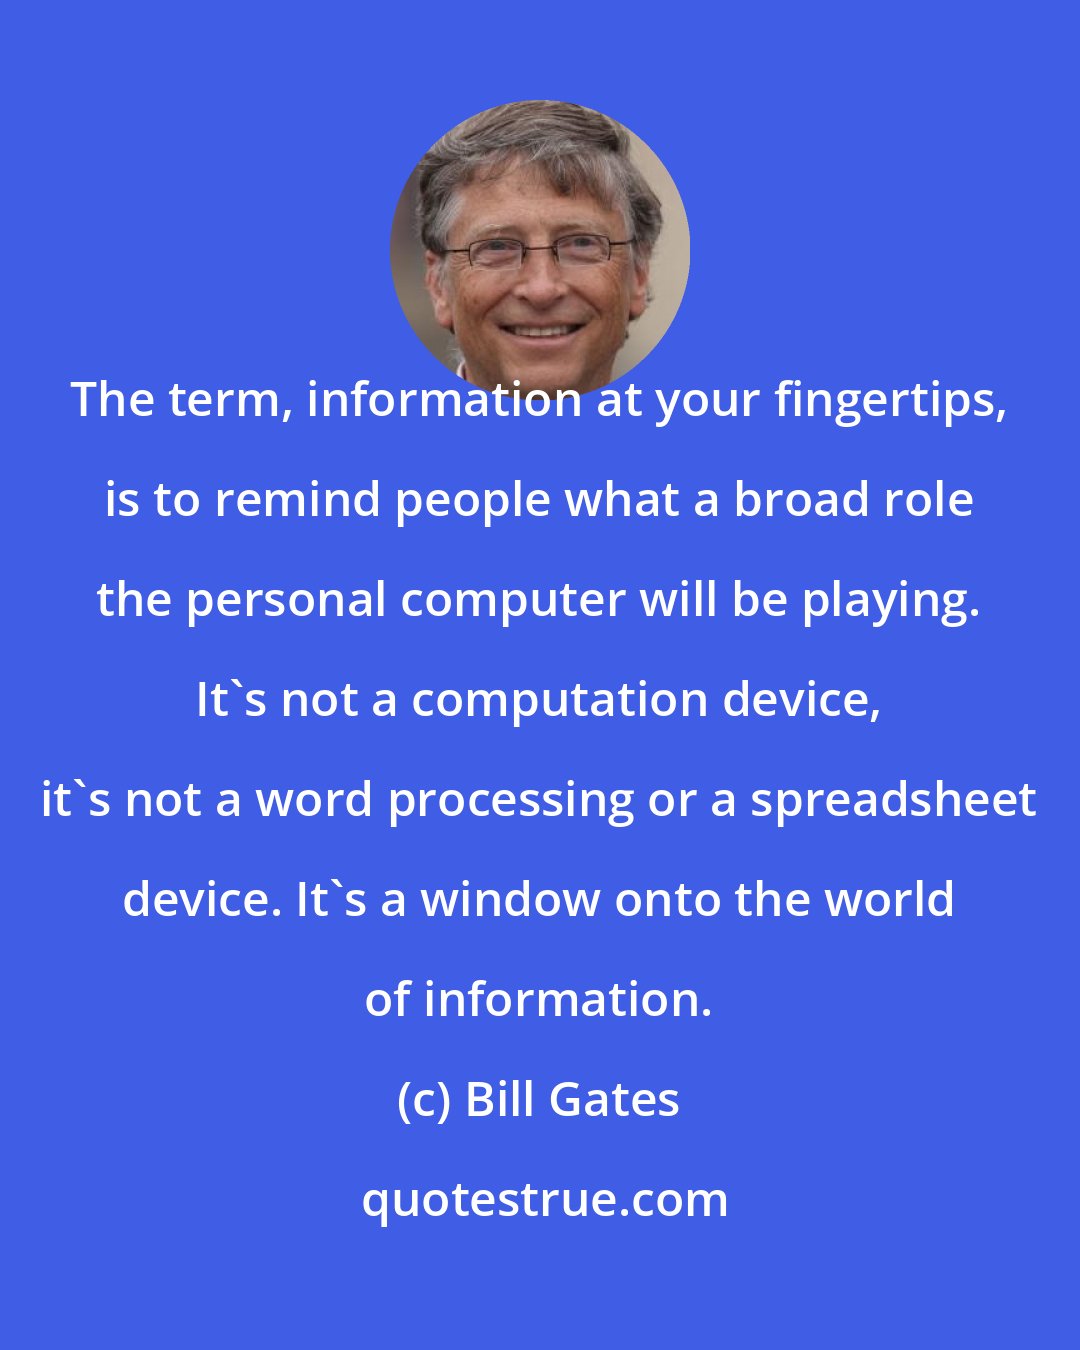 Bill Gates: The term, information at your fingertips, is to remind people what a broad role the personal computer will be playing. It's not a computation device, it's not a word processing or a spreadsheet device. It's a window onto the world of information.